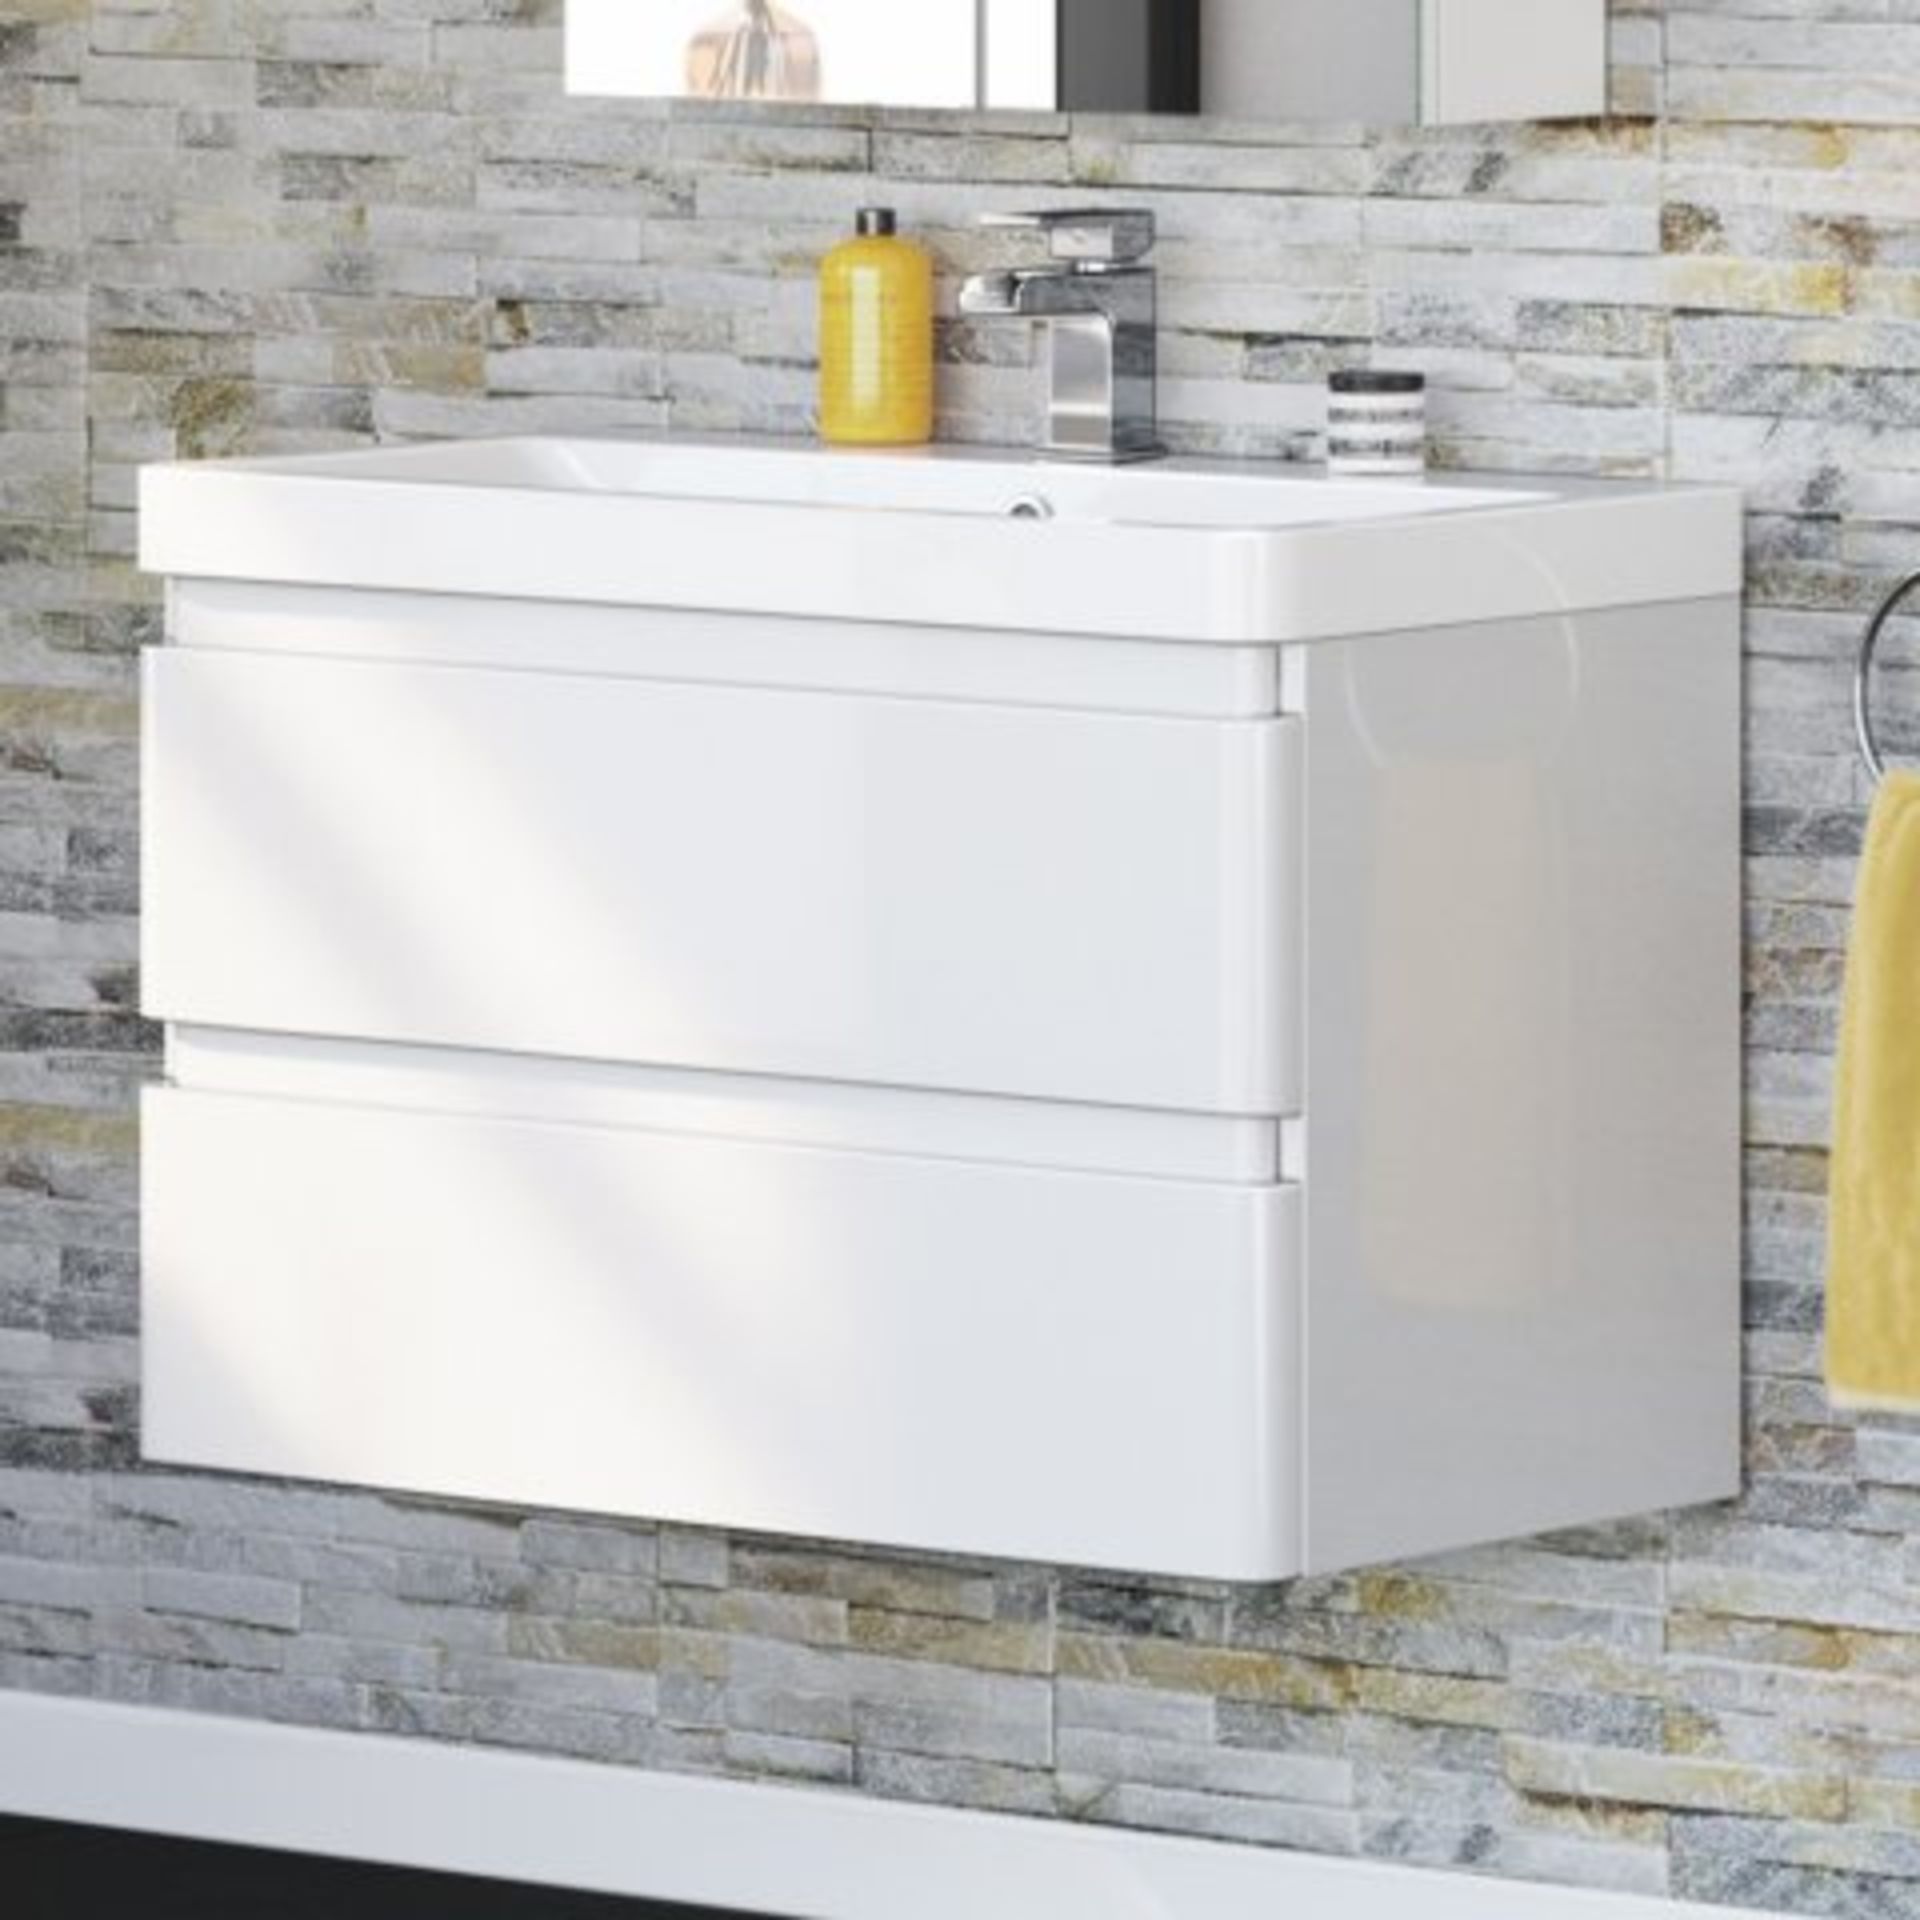 (H17) 800mm Denver II Gloss White Built In Basin Drawer Unit - Wall Hung. RRP £599.99. COMES